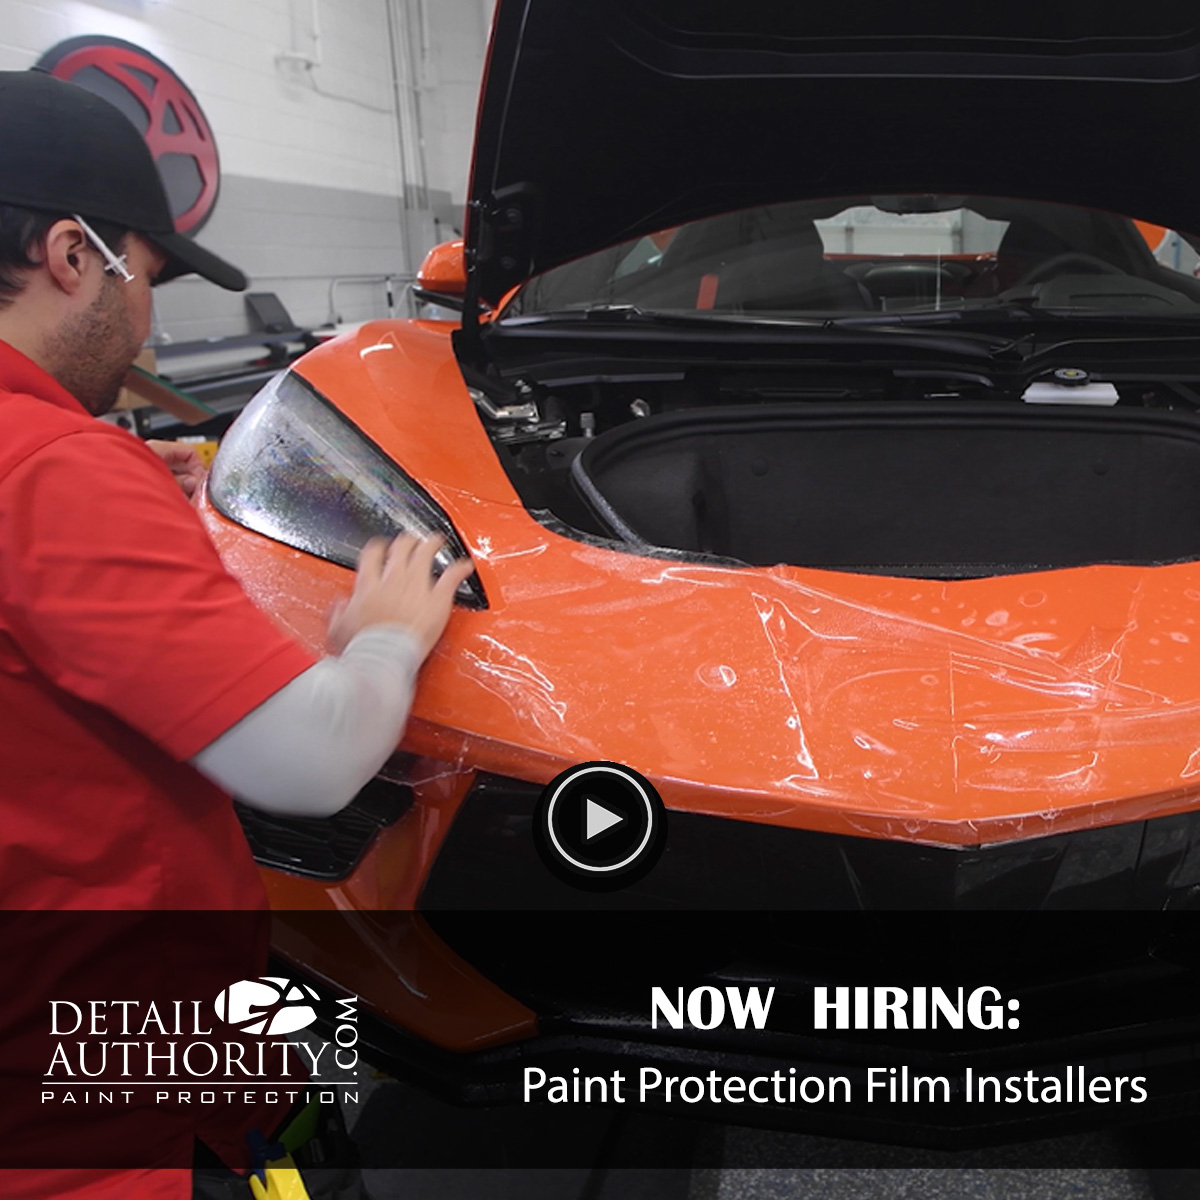 Now Hiring at Detail Authority